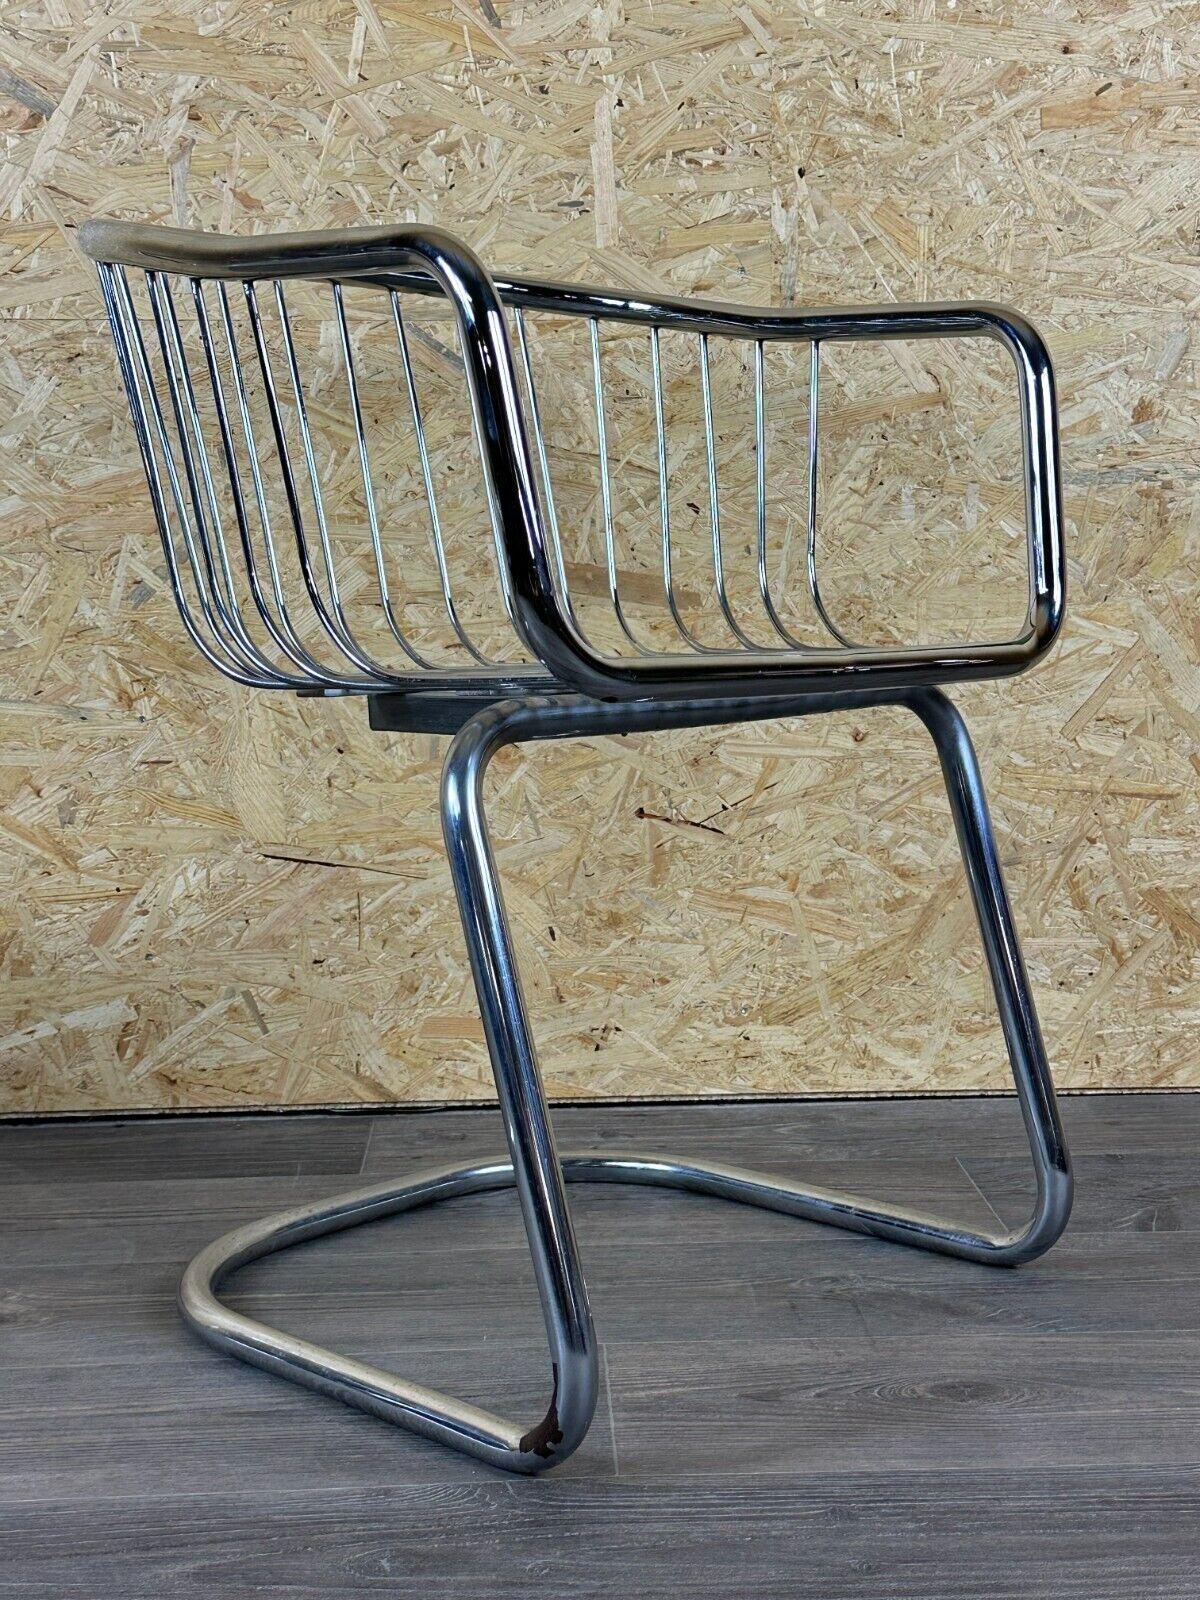 2x 60s 70s wire chair armchair dining chair metal chrome plated design For Sale 6